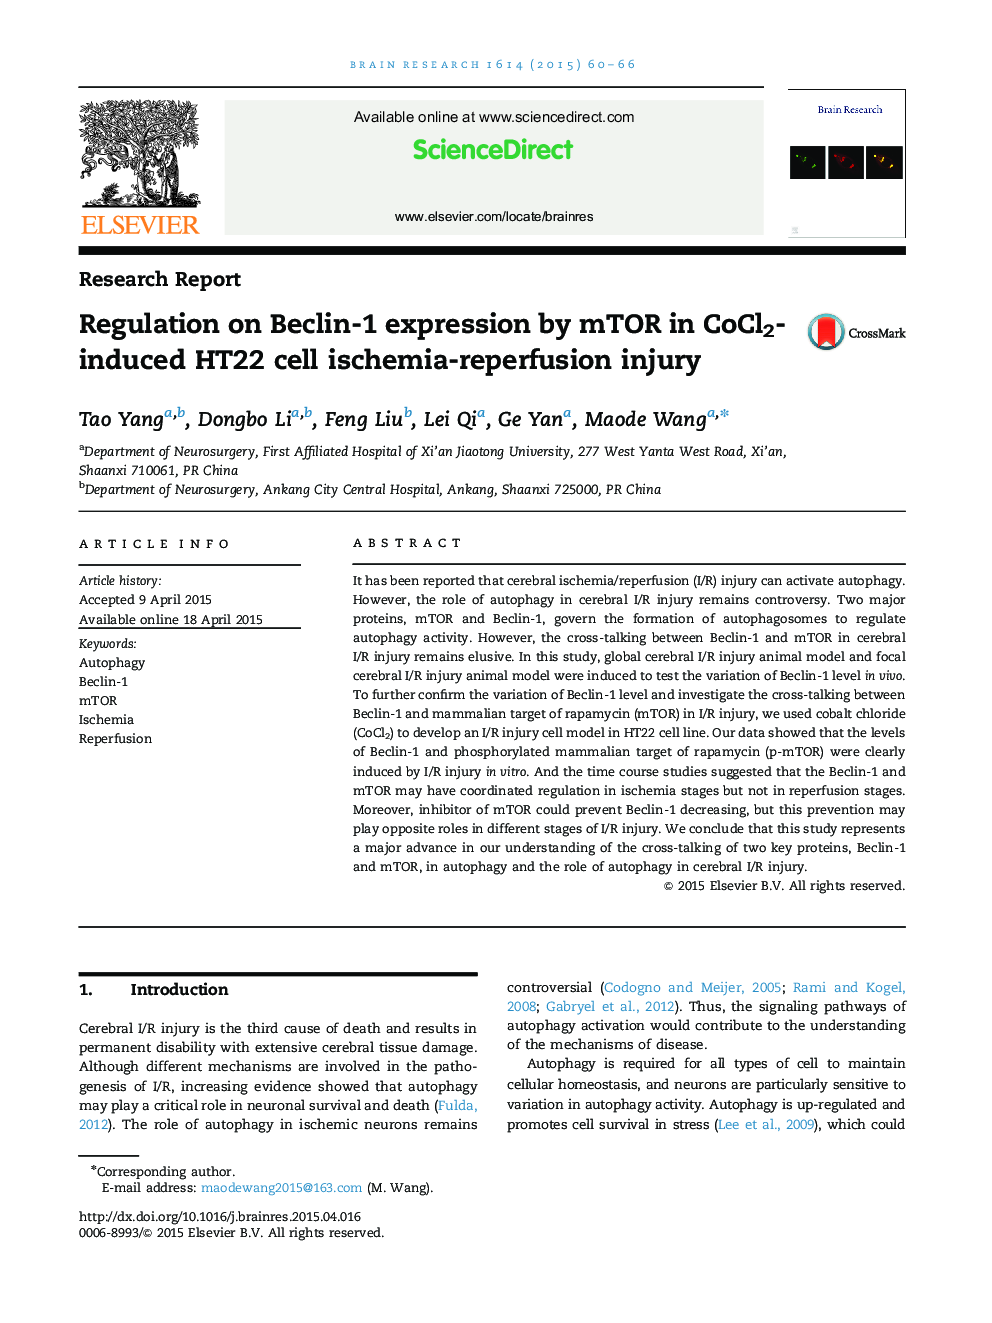 Research ReportRegulation on Beclin-1 expression by mTOR in CoCl2-induced HT22 cell ischemia-reperfusion injury